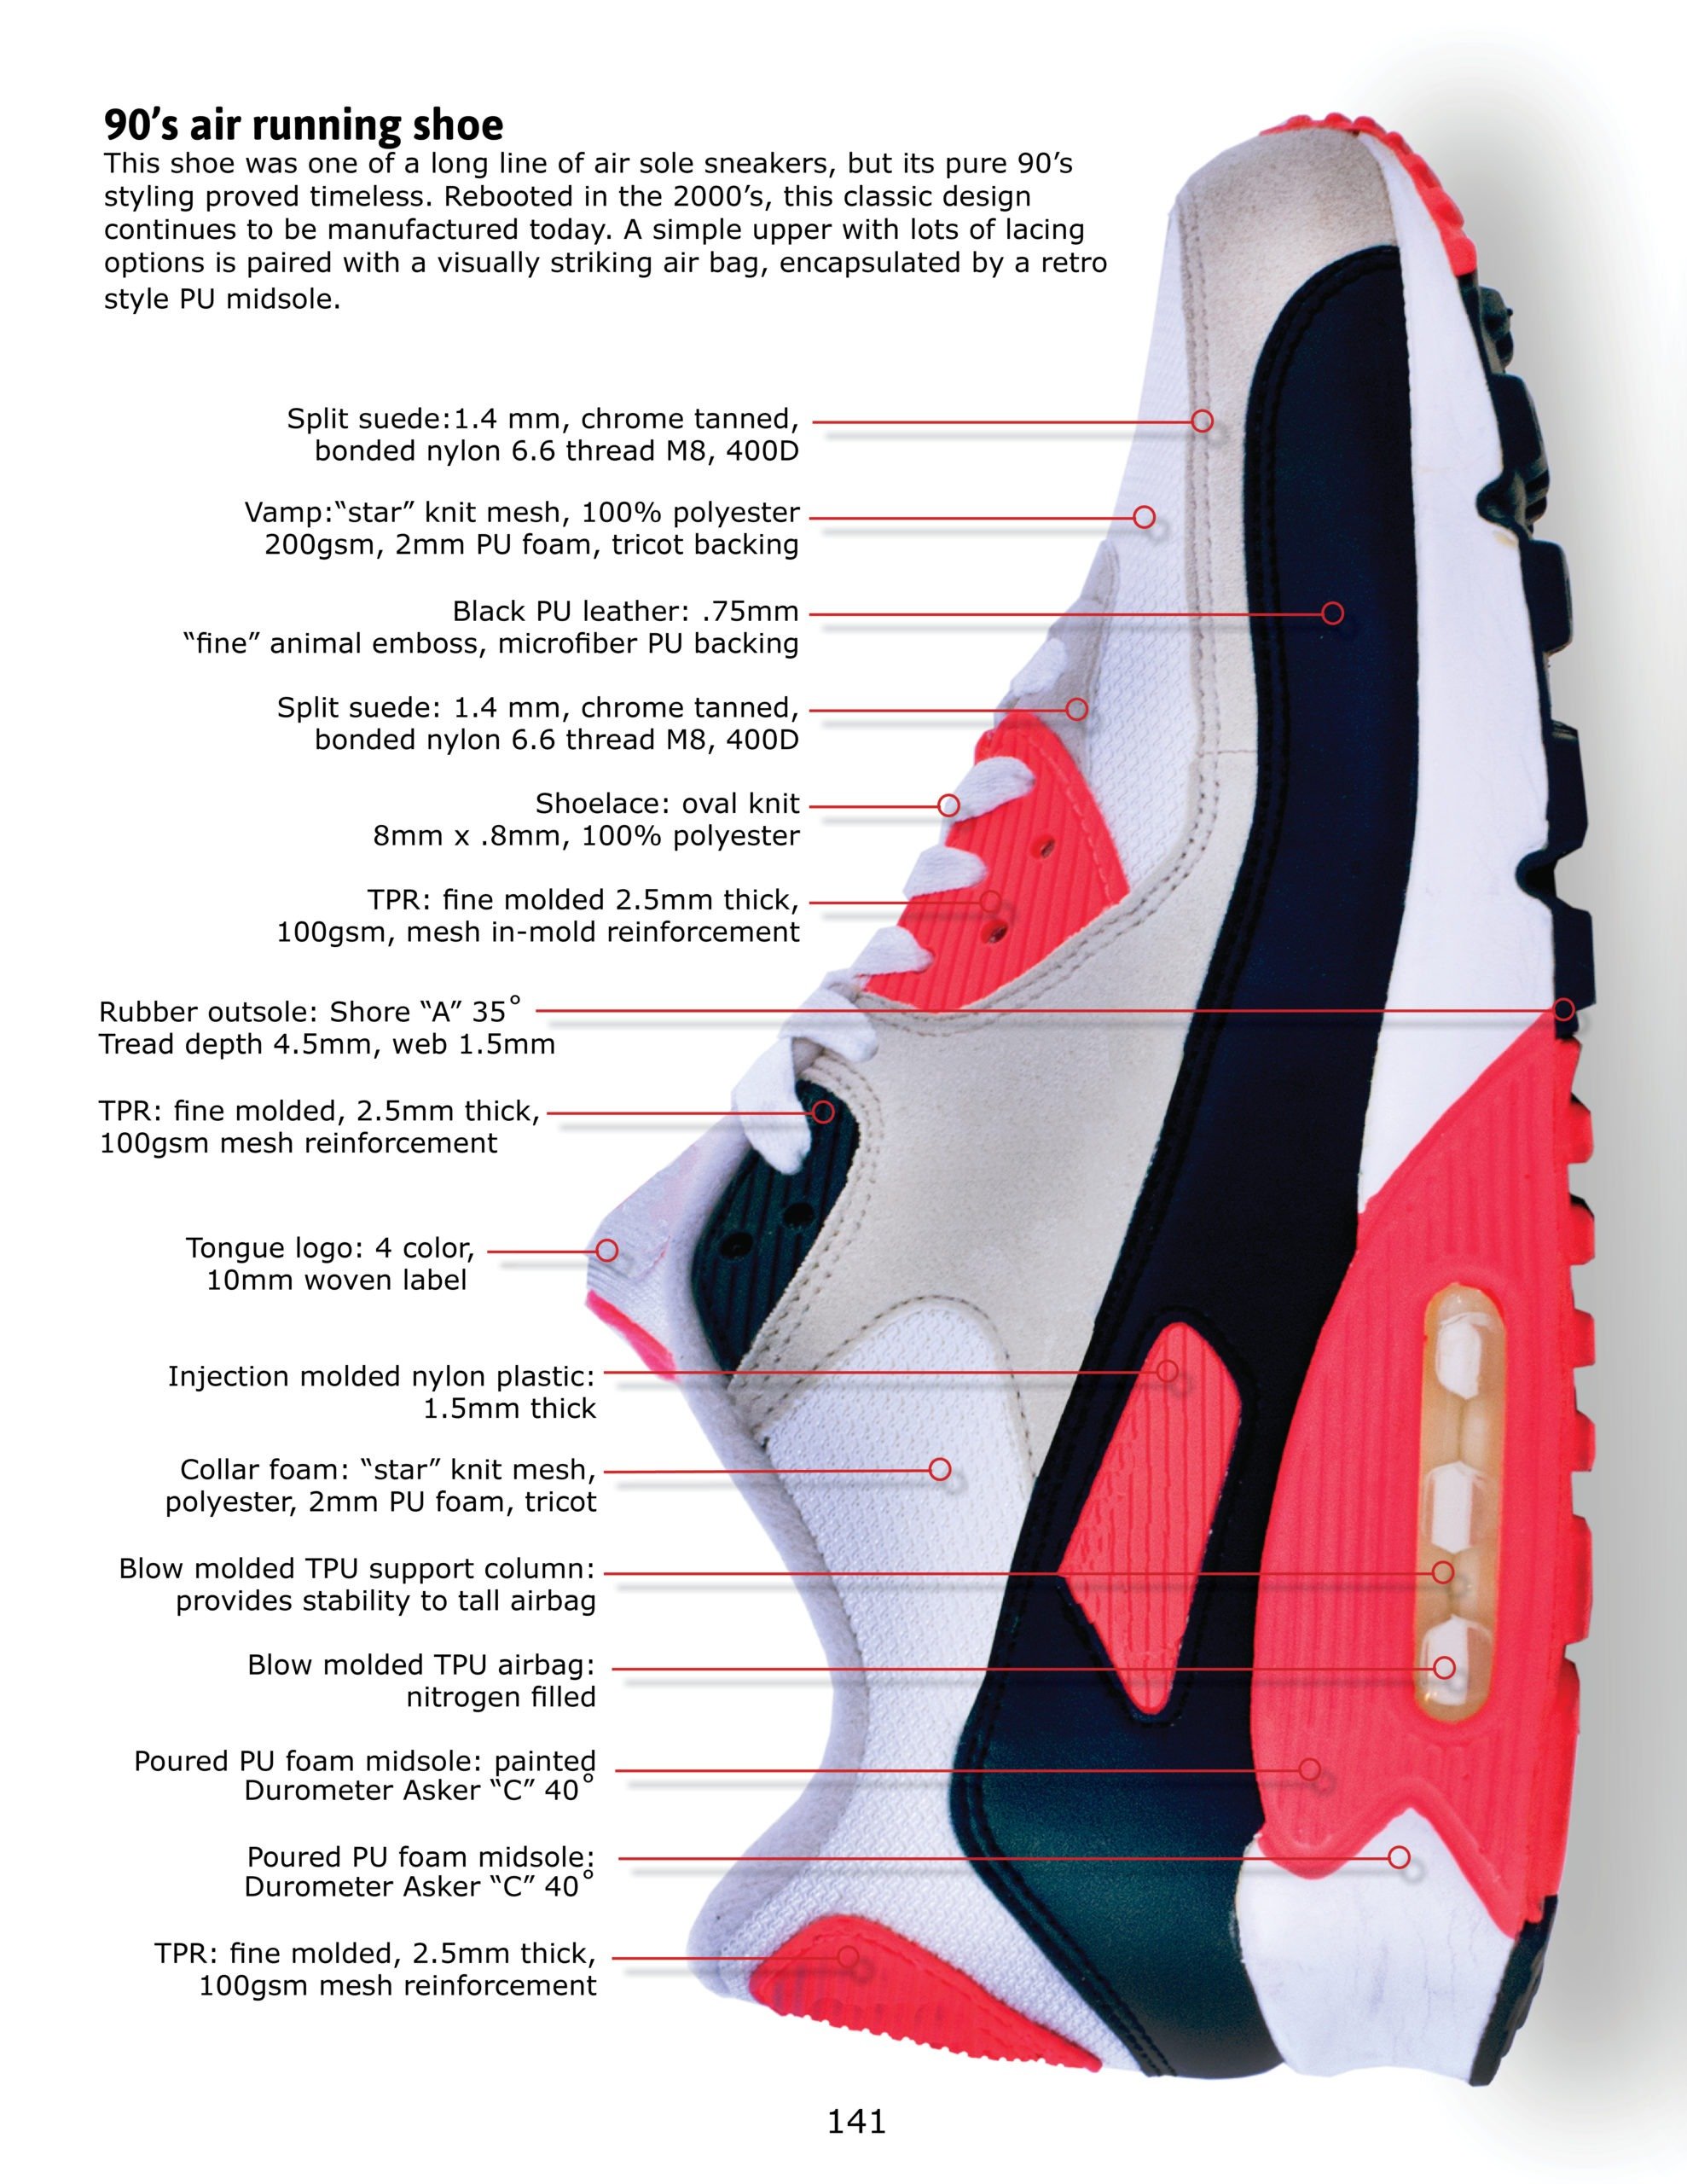 What materials are Nike shoes made of?